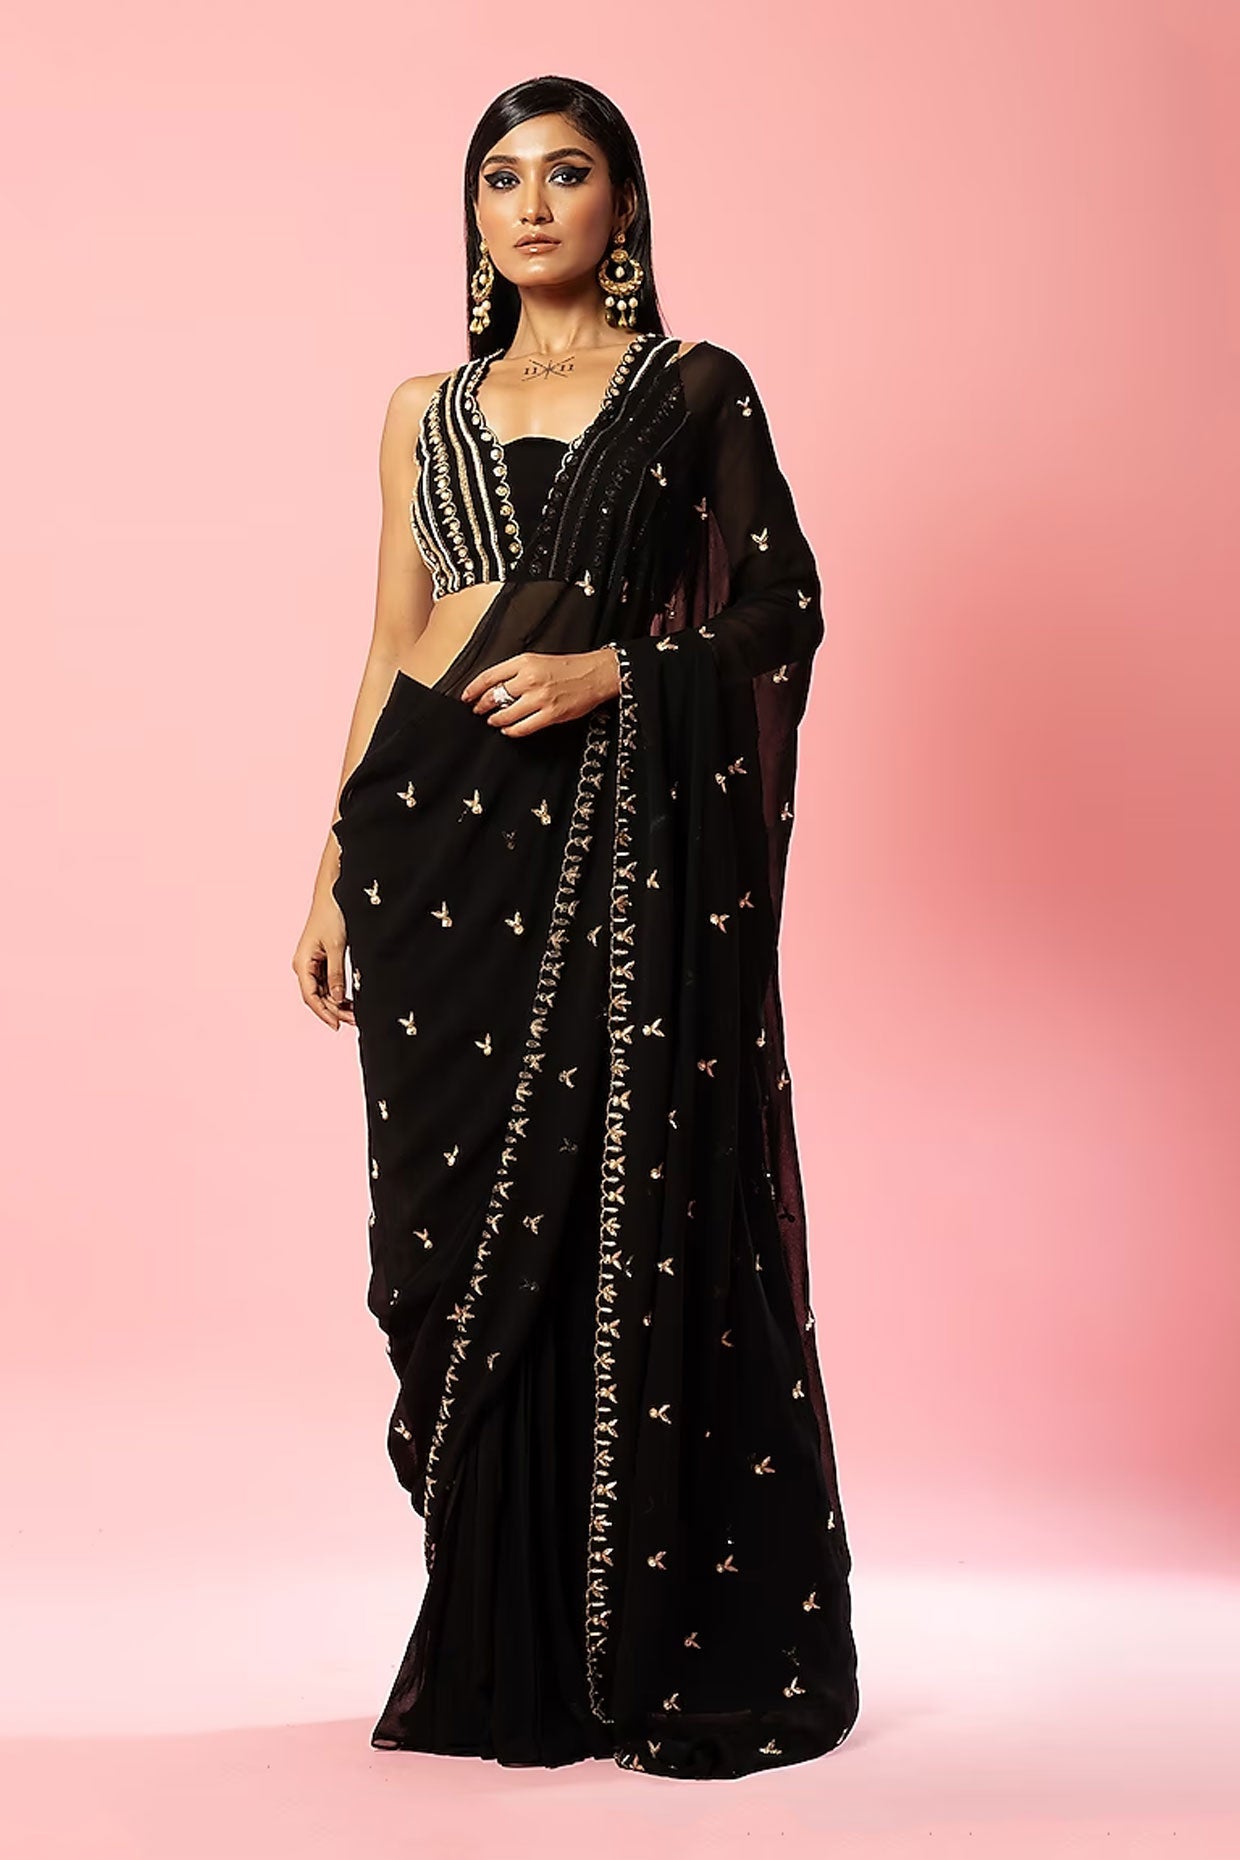 Which Saree to Purchase for a Quick Drape - Pre-Stitched or Traditional? -  Nihal Fashions Blog